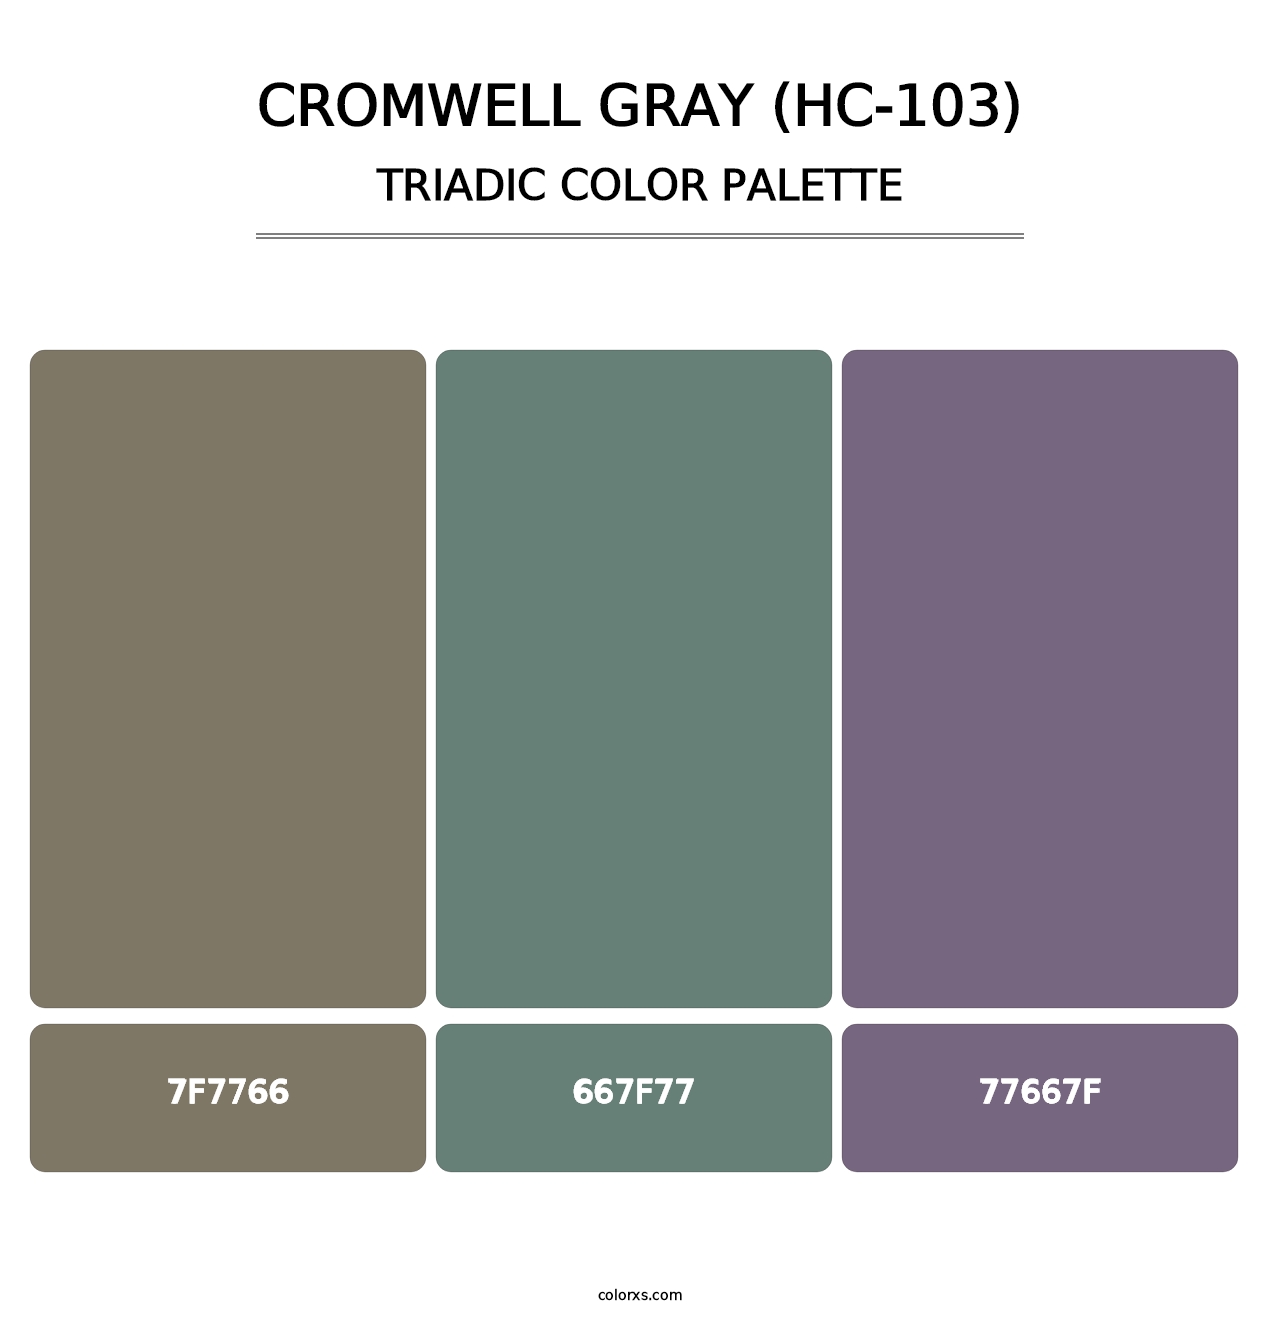 Cromwell Gray (HC-103) - Triadic Color Palette